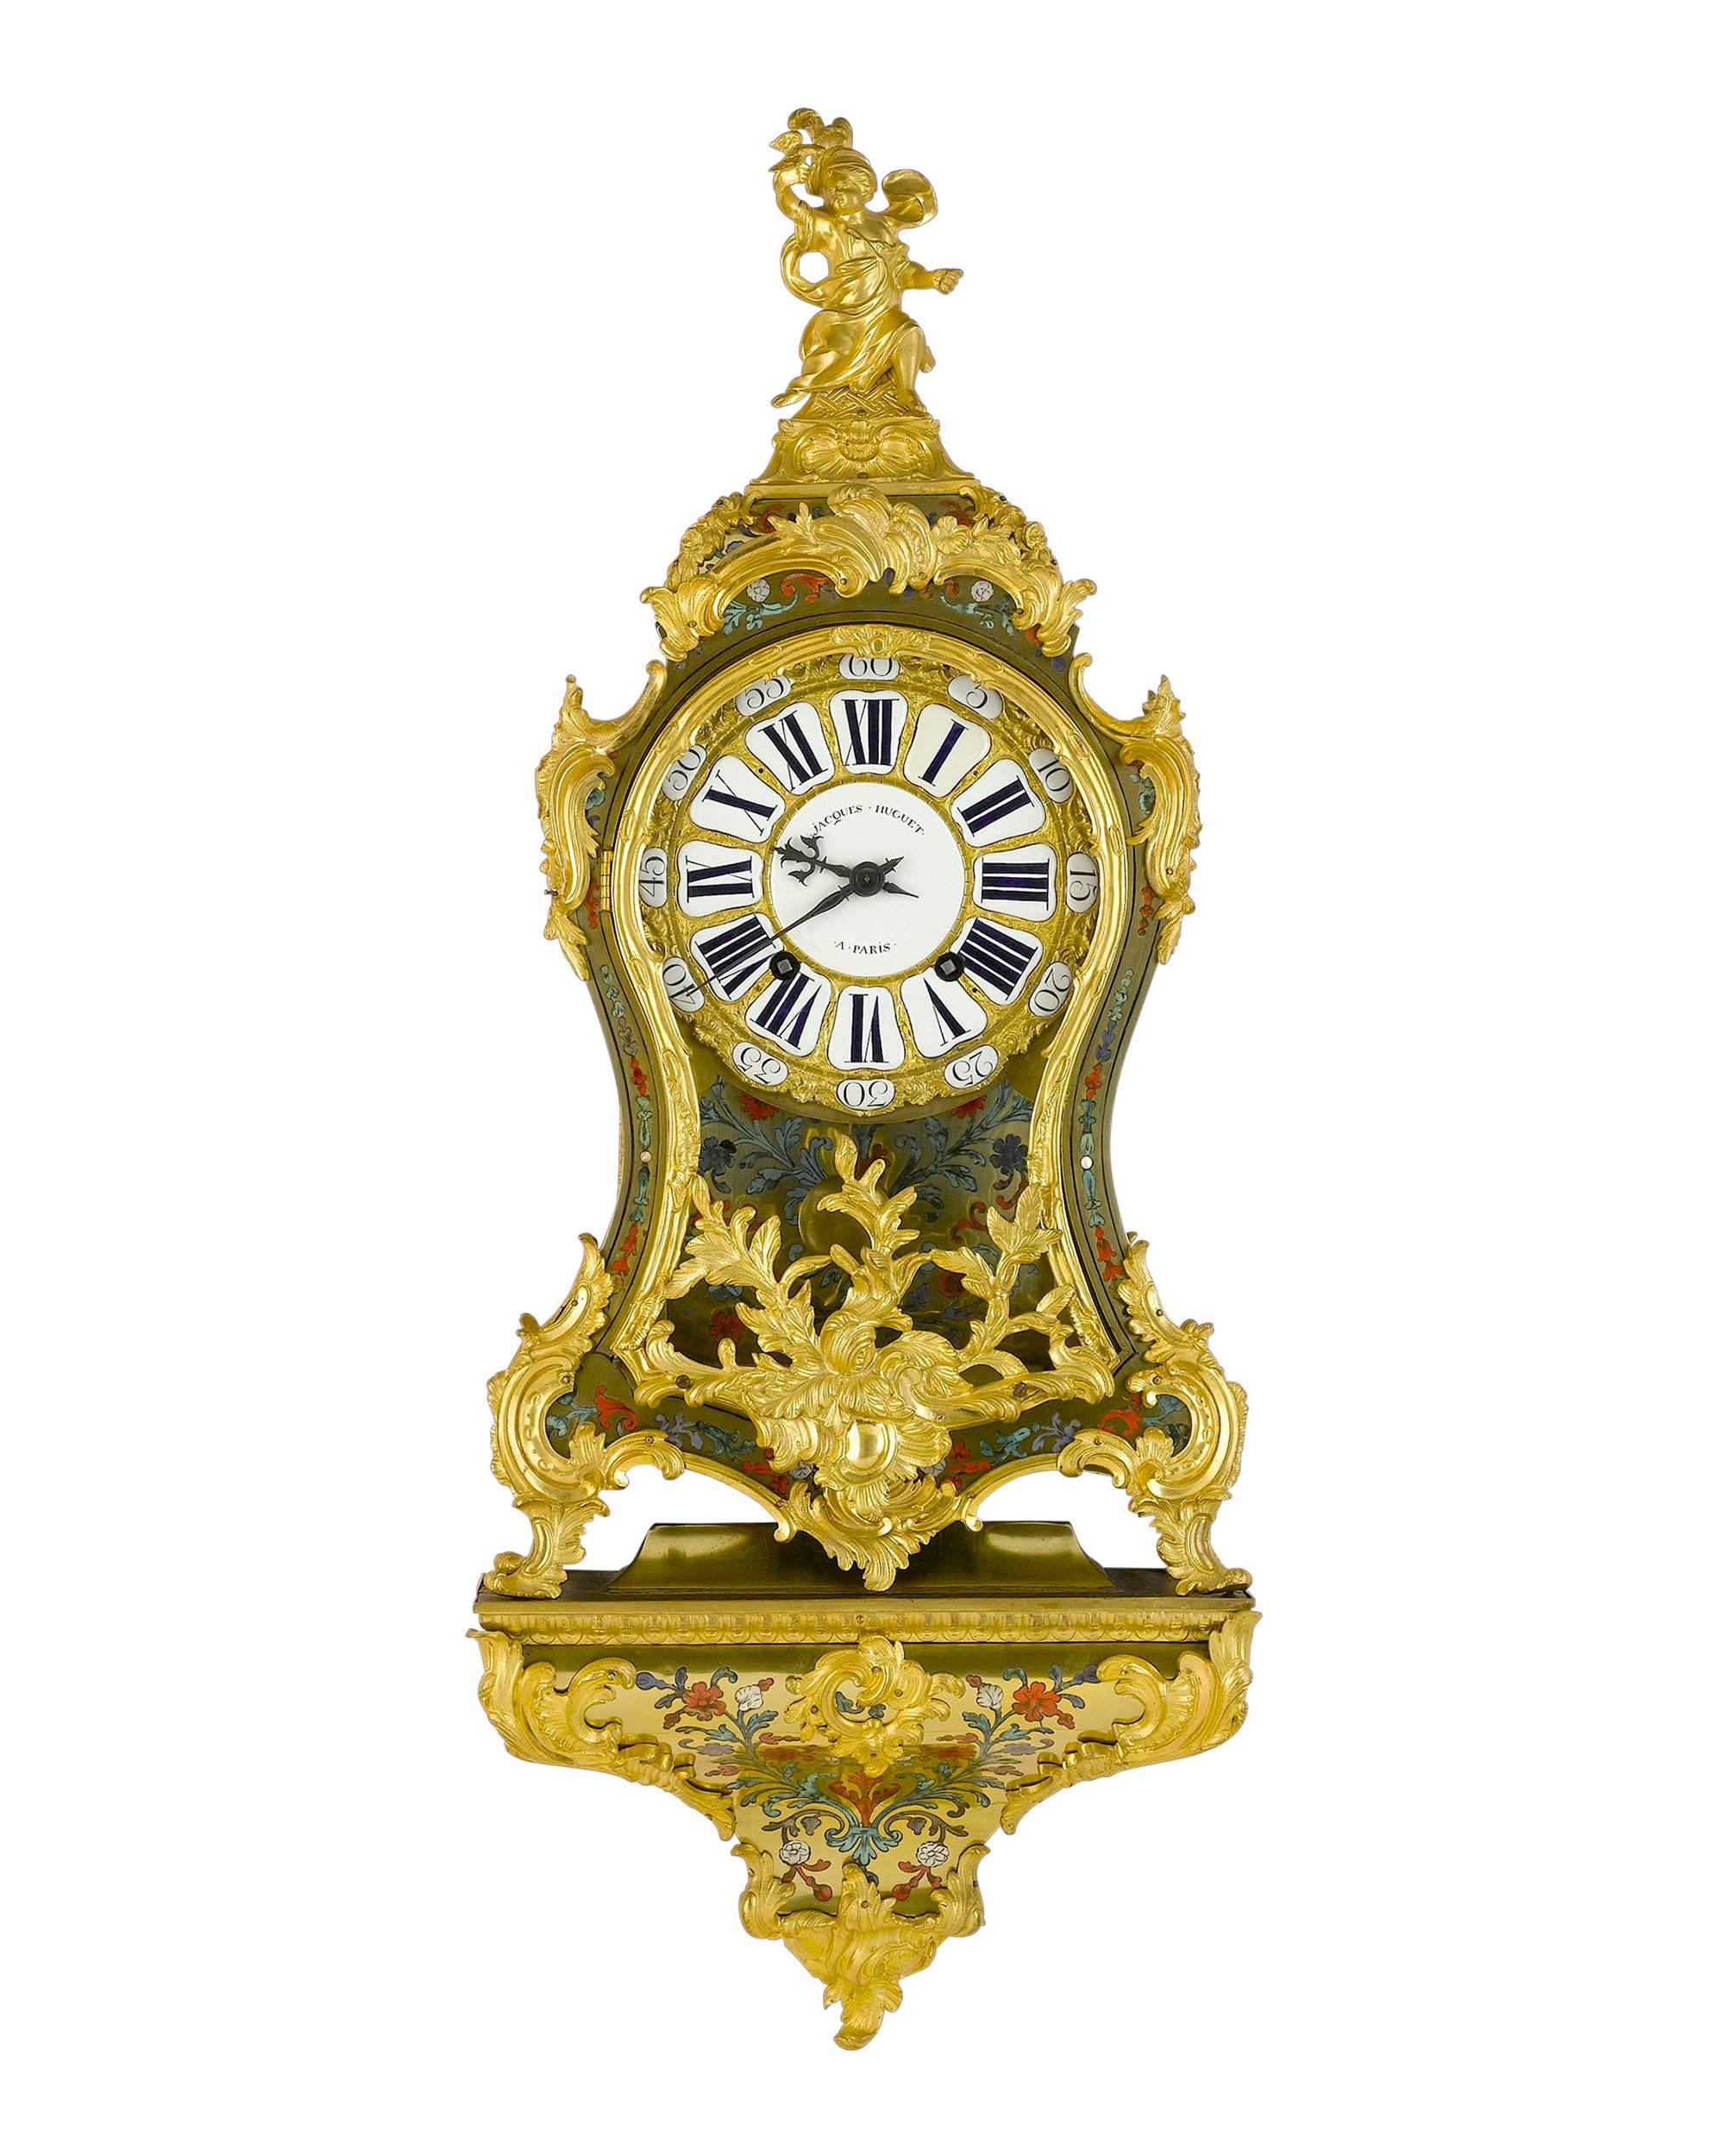 This outstanding Louis XV clock displays exquisite marquetry in the style of André-Charles Boulle and features a movement crafted by Jacques Huguet, one of the premier clockmakers of the 18th century. The clock and its distinctive matching shelf are